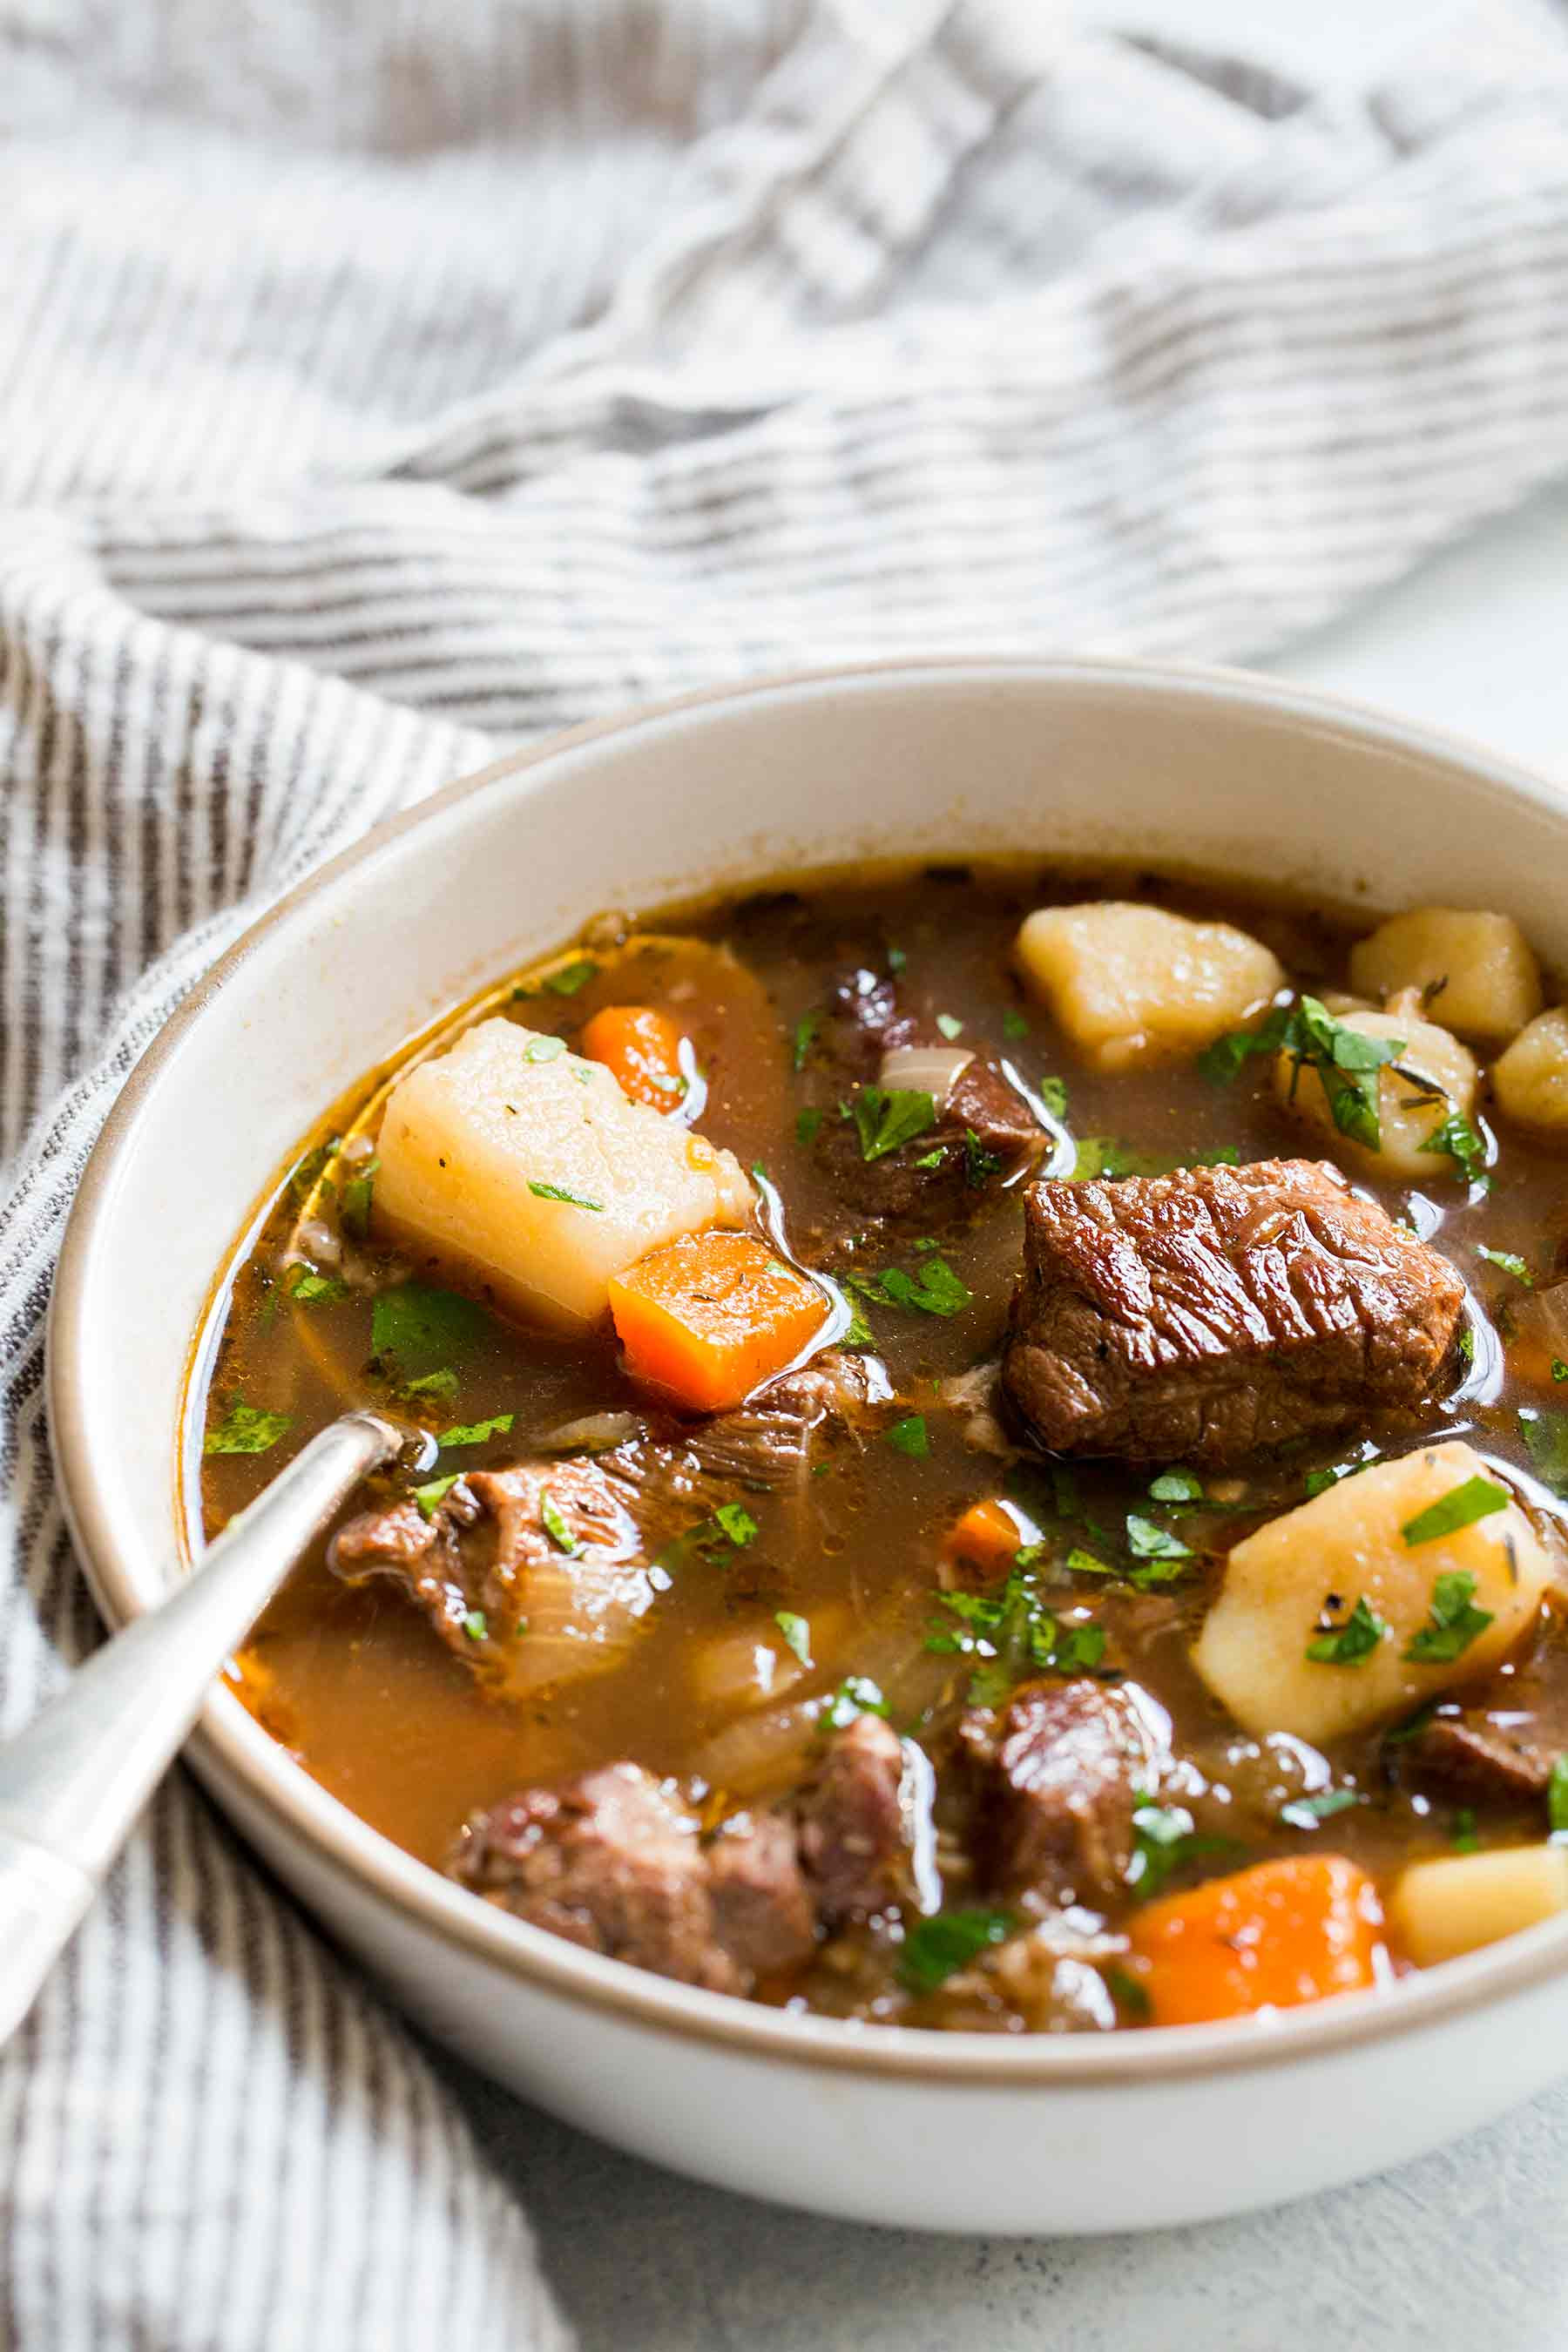 How To Make Beef Stew
 Irish Beef Stew Recipe with Video